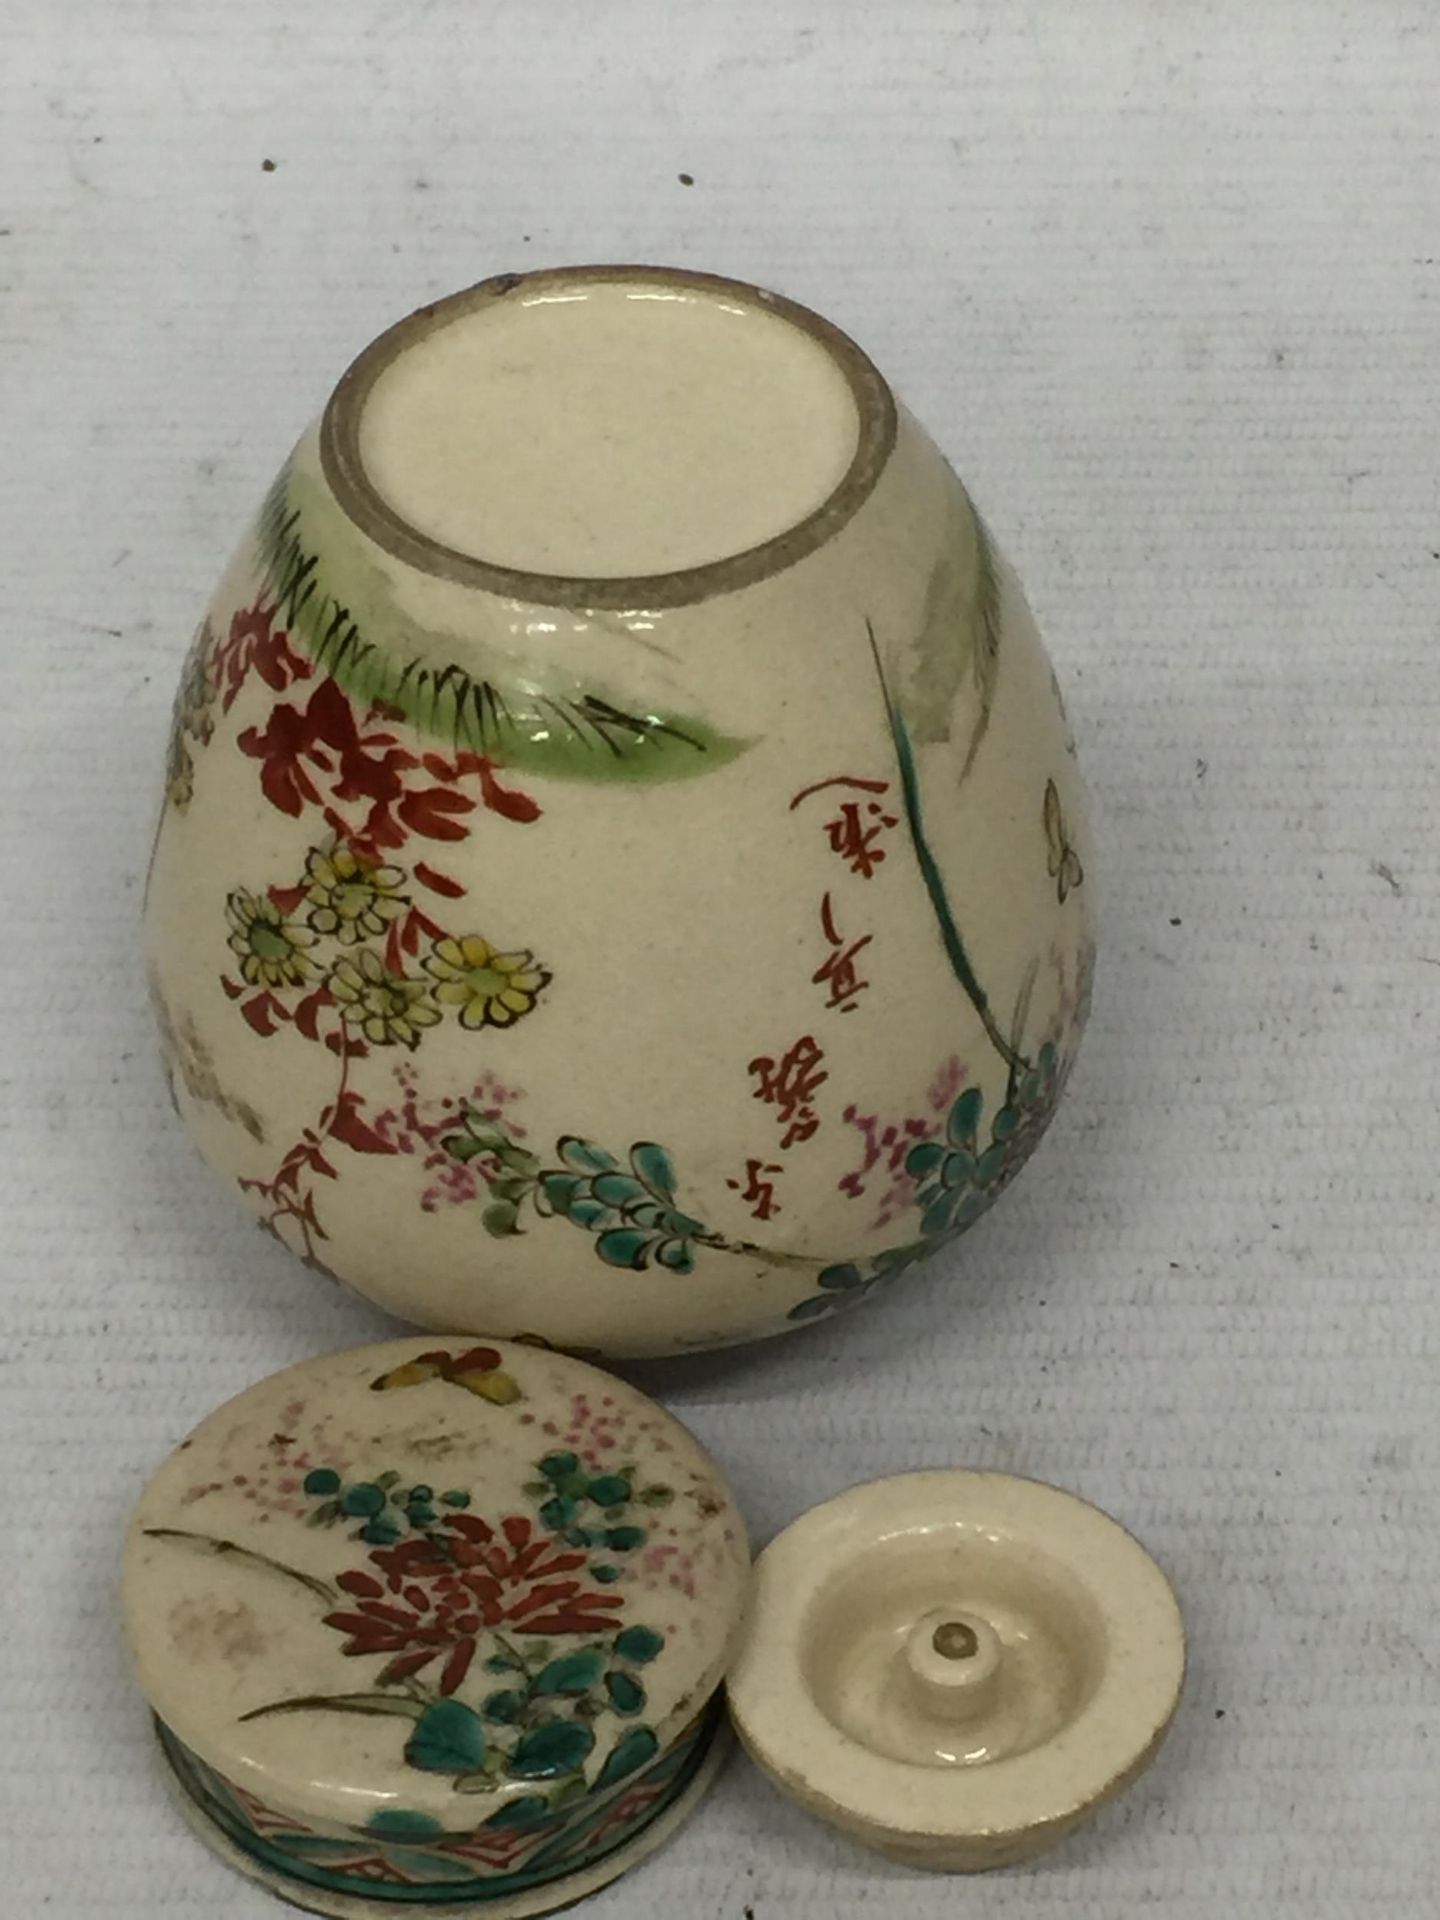 A JAPANESE STONEWARE LIDDED SMALL POT POURRI / GINGER JAR WITH BIRD AND FLORAL DESIGN AND INNDER LID - Image 7 of 7